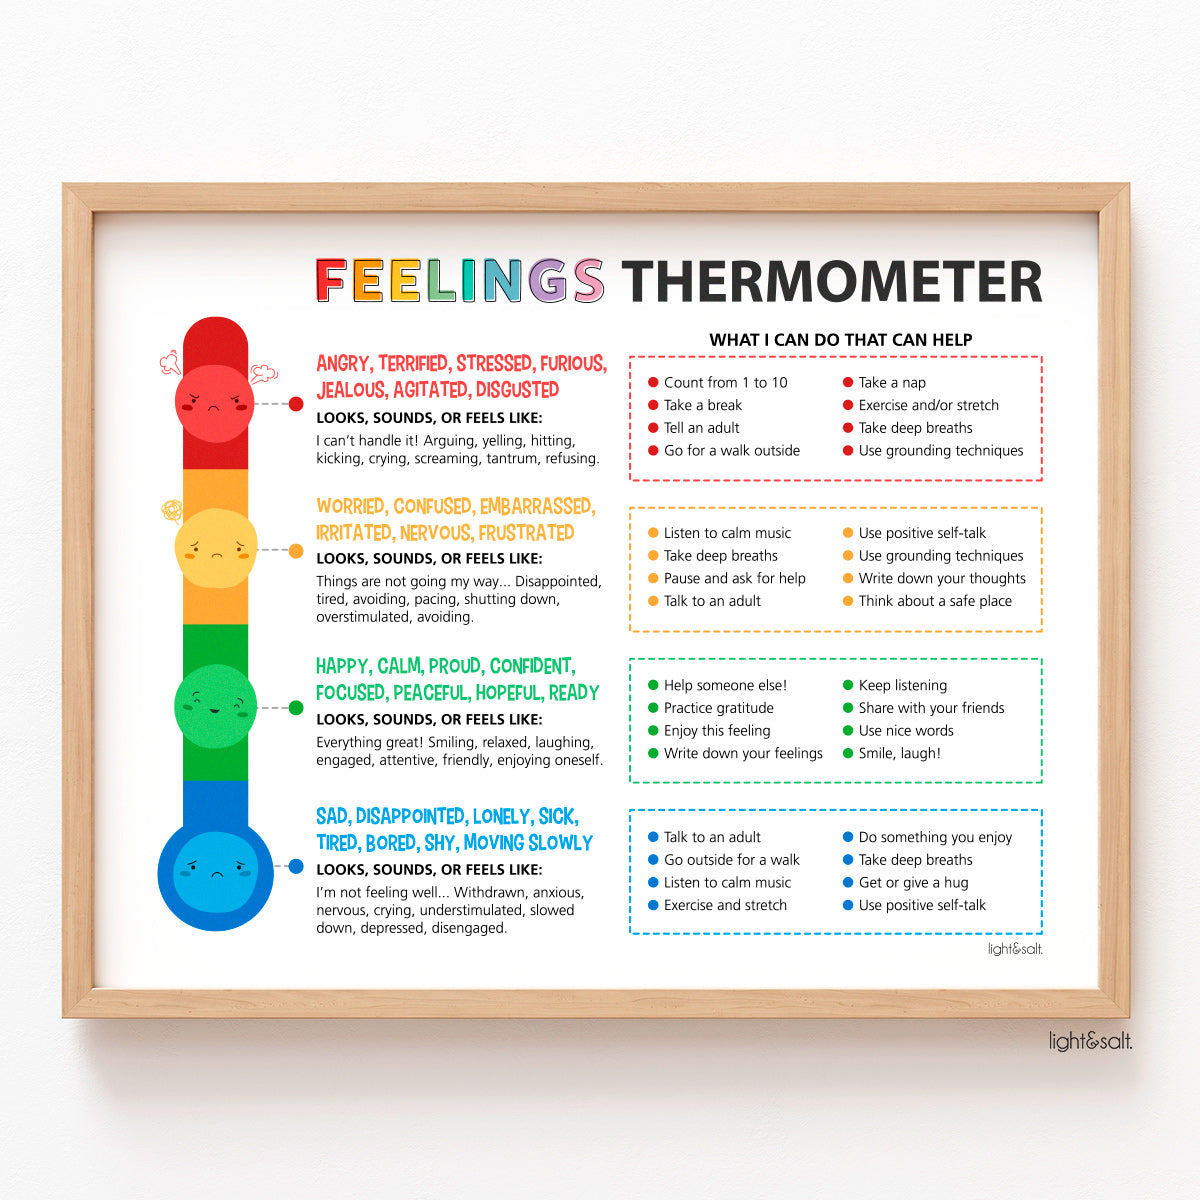 Feelings thermometer with coping skills poster